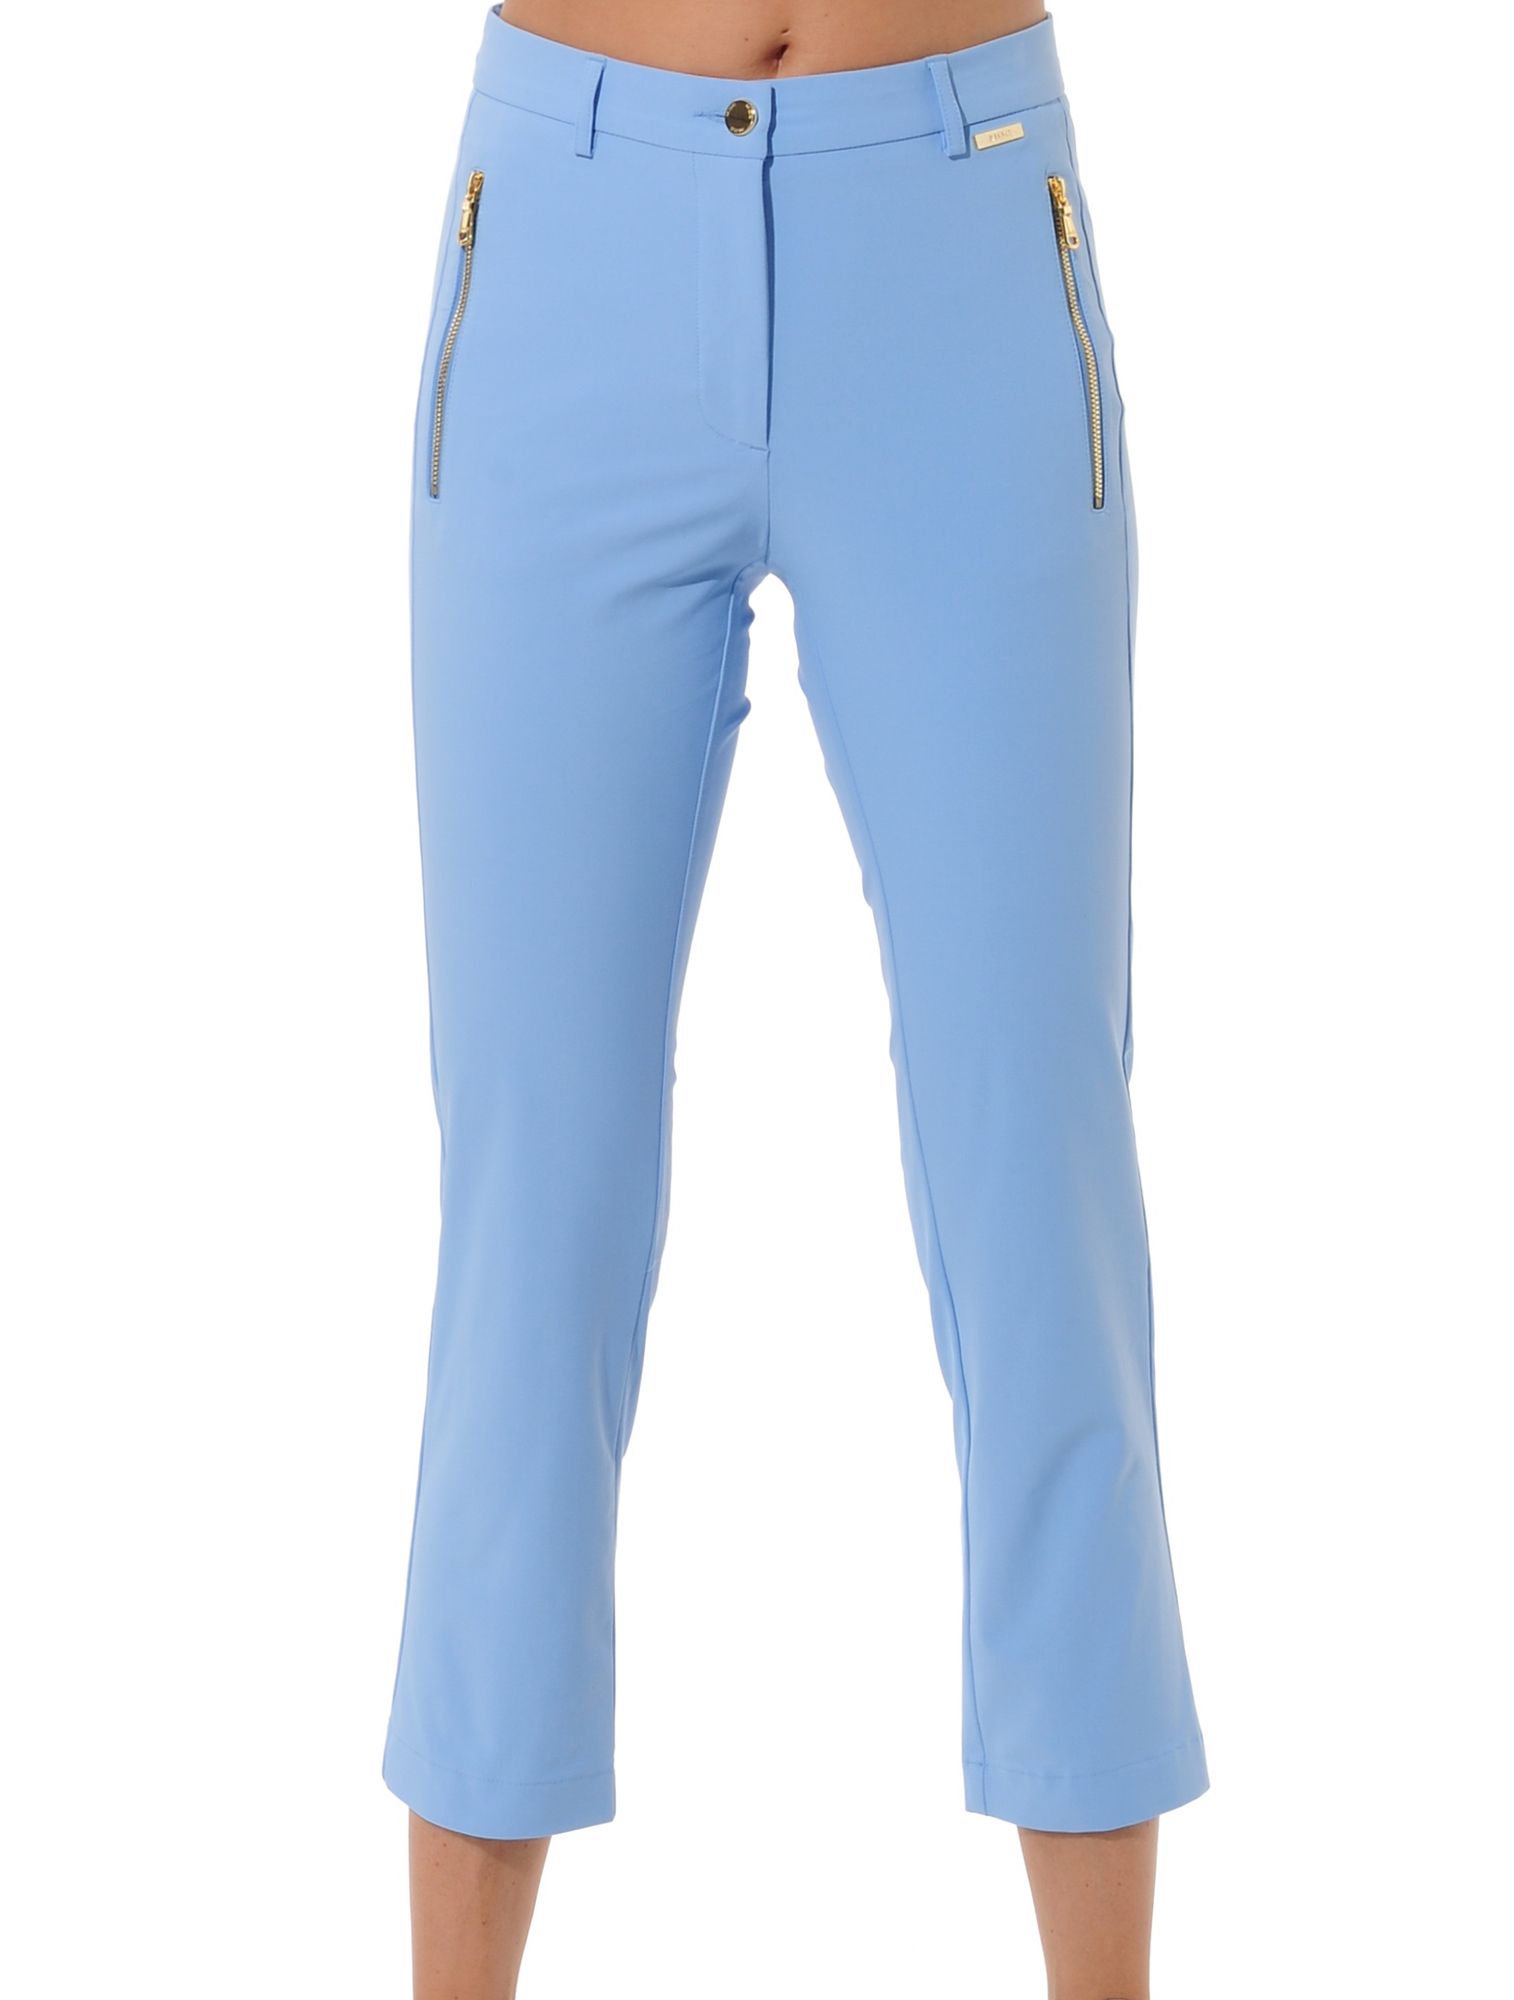 4way stretch cropped chinos baby blue